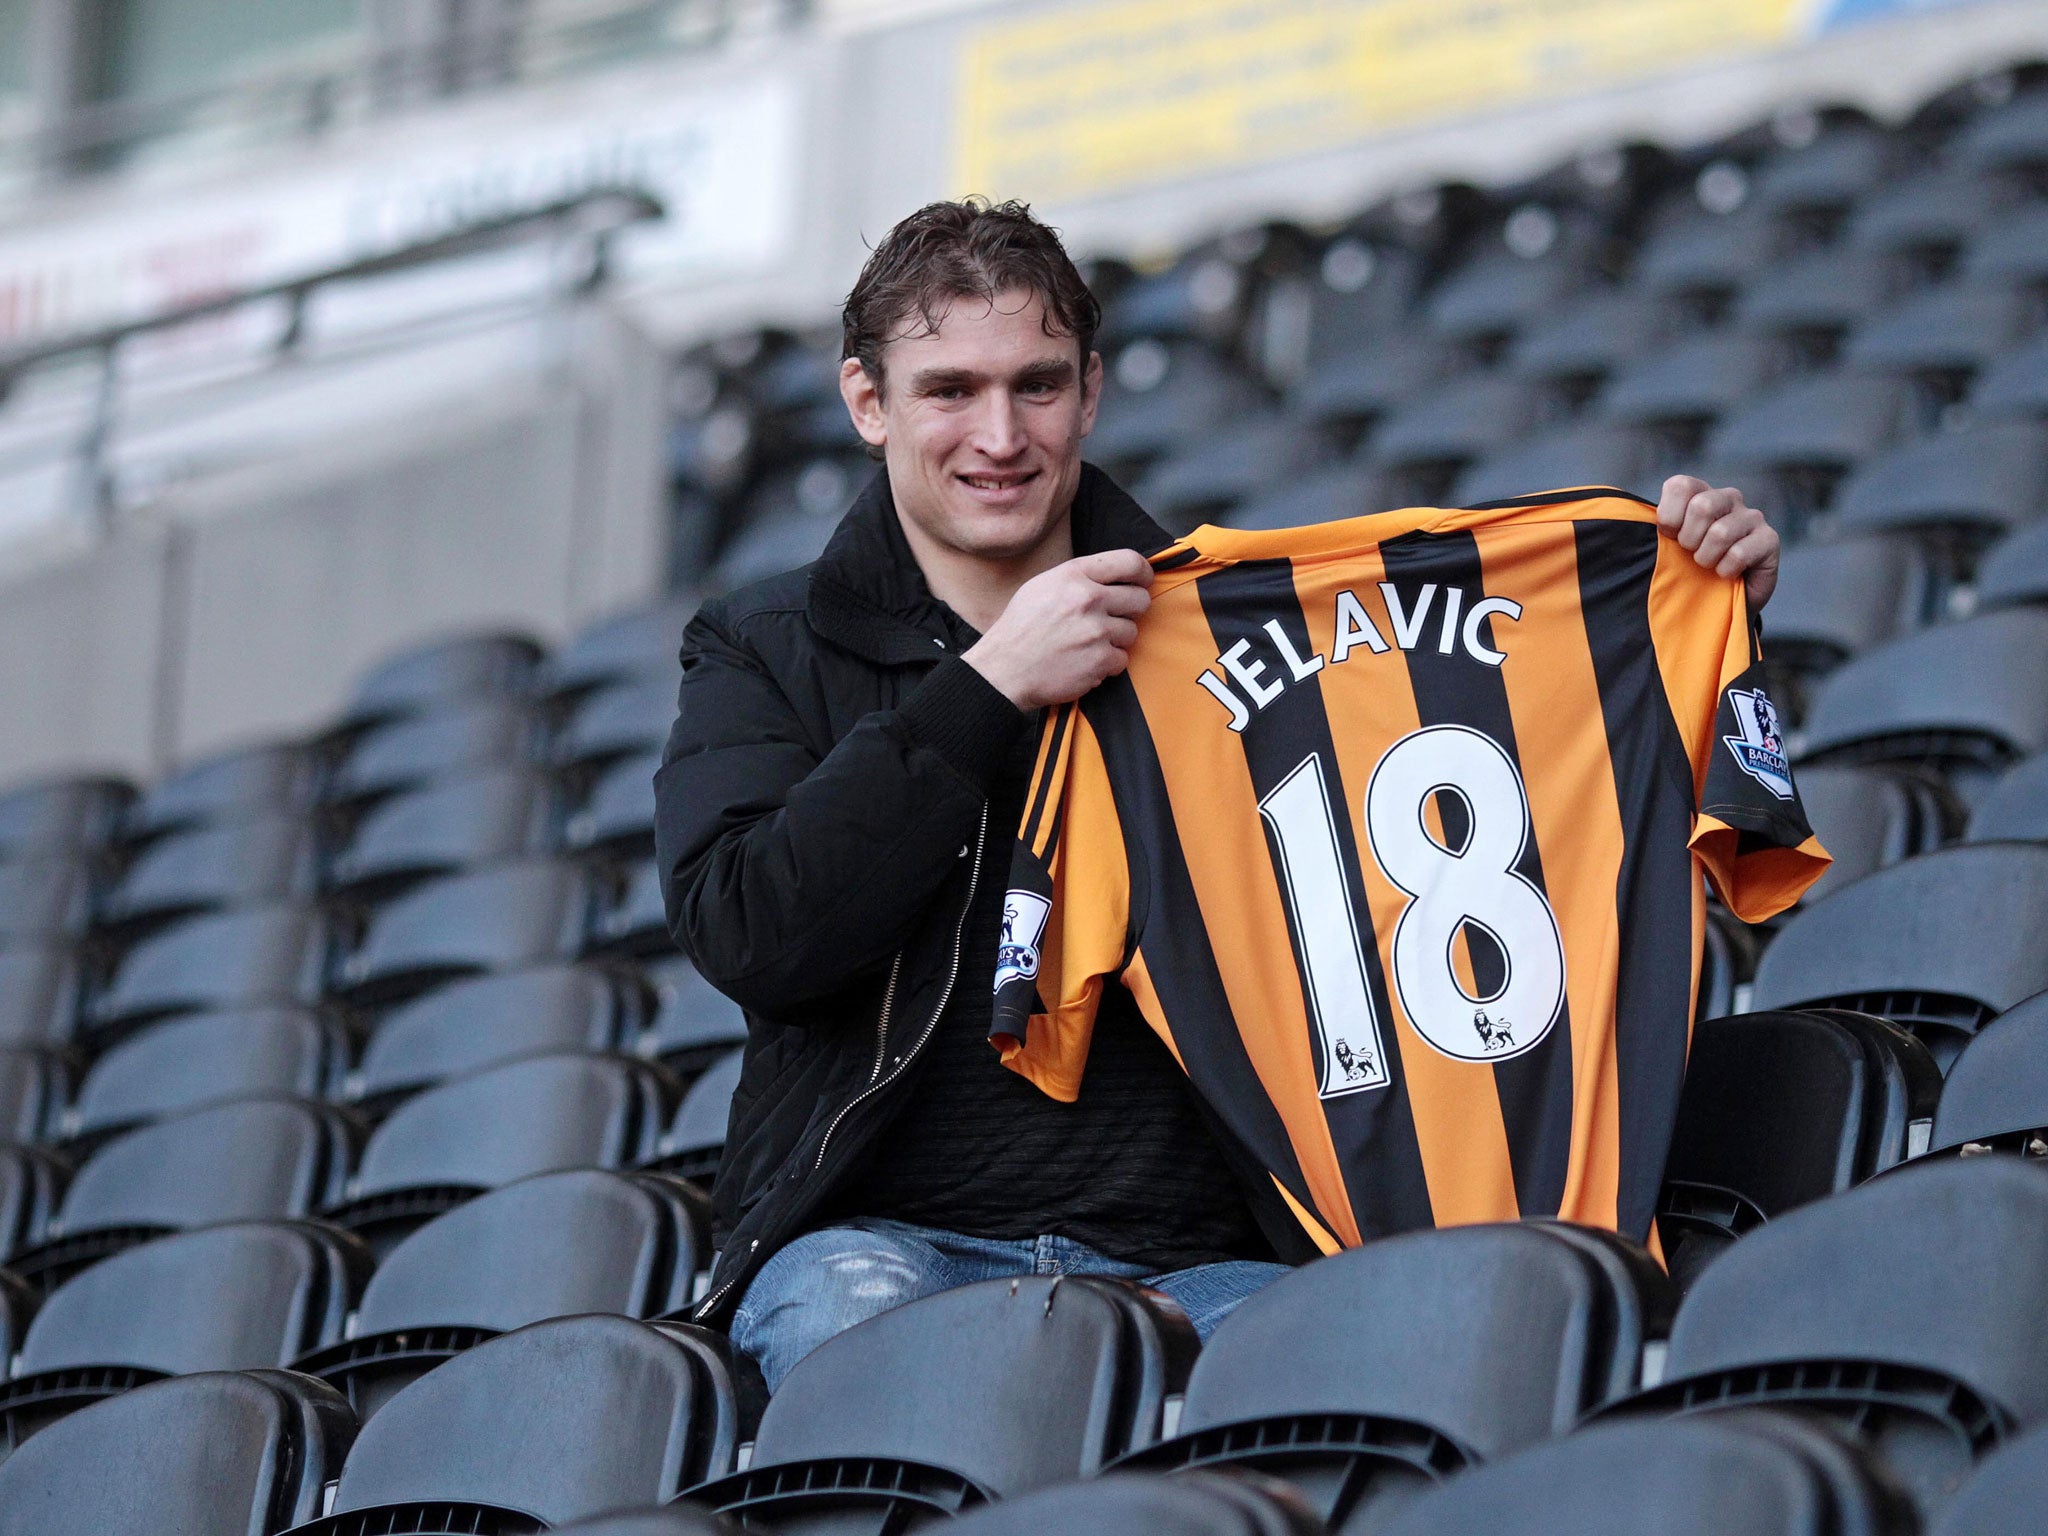 Nikica Jelavic, one of Hull's new signings, is unveiled at the KC Stadium. With his top-flight experience he should soon make an impact